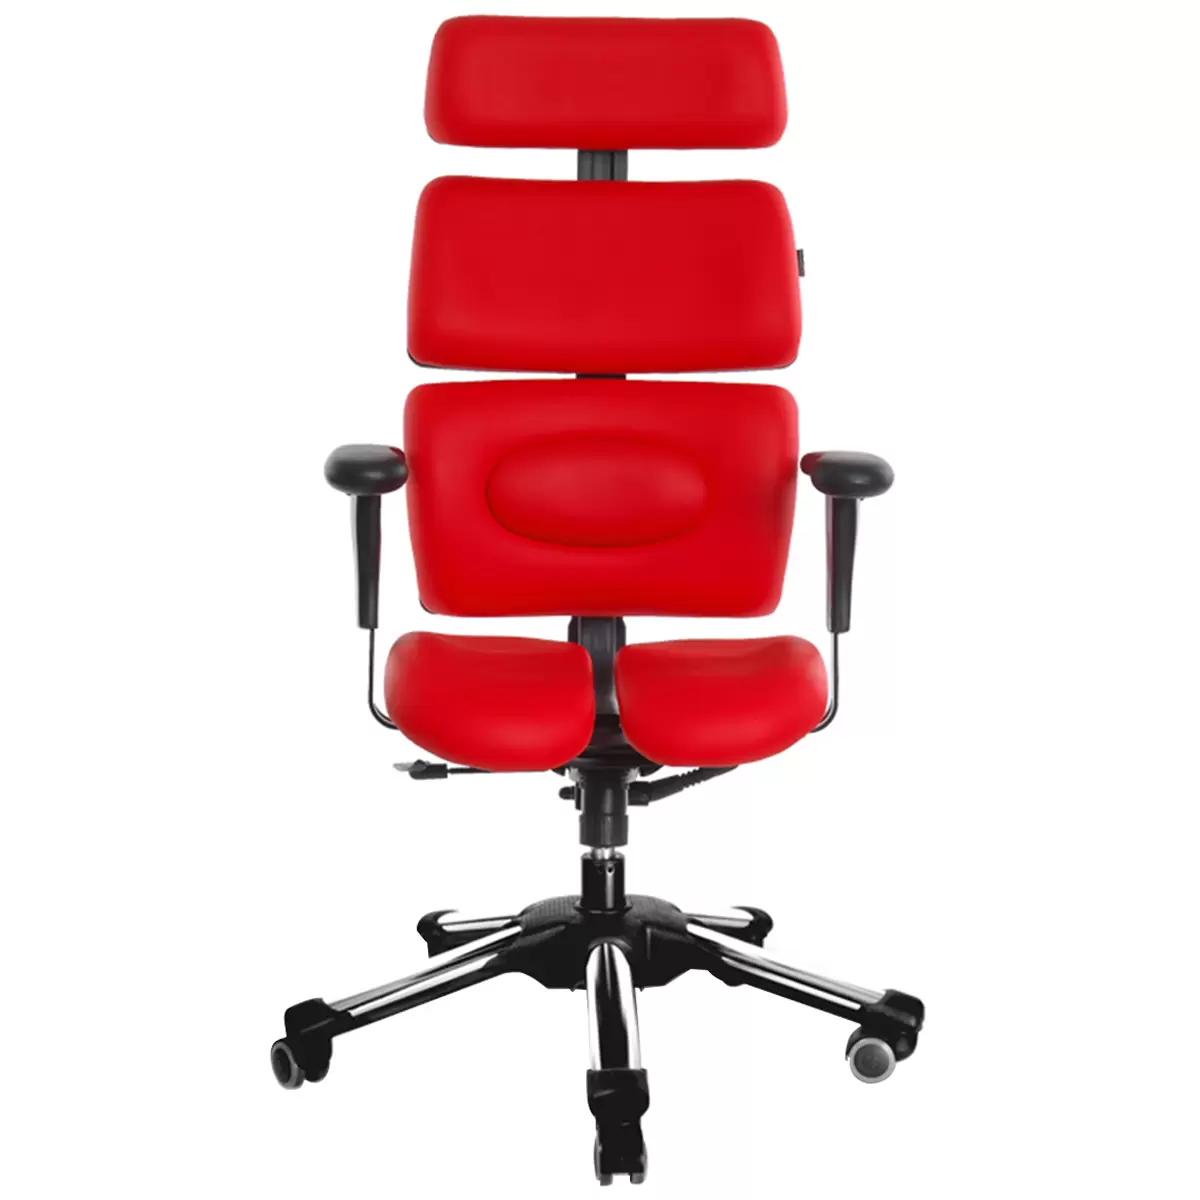 IDS Hara Chair Doctor V Black Pattern - Red